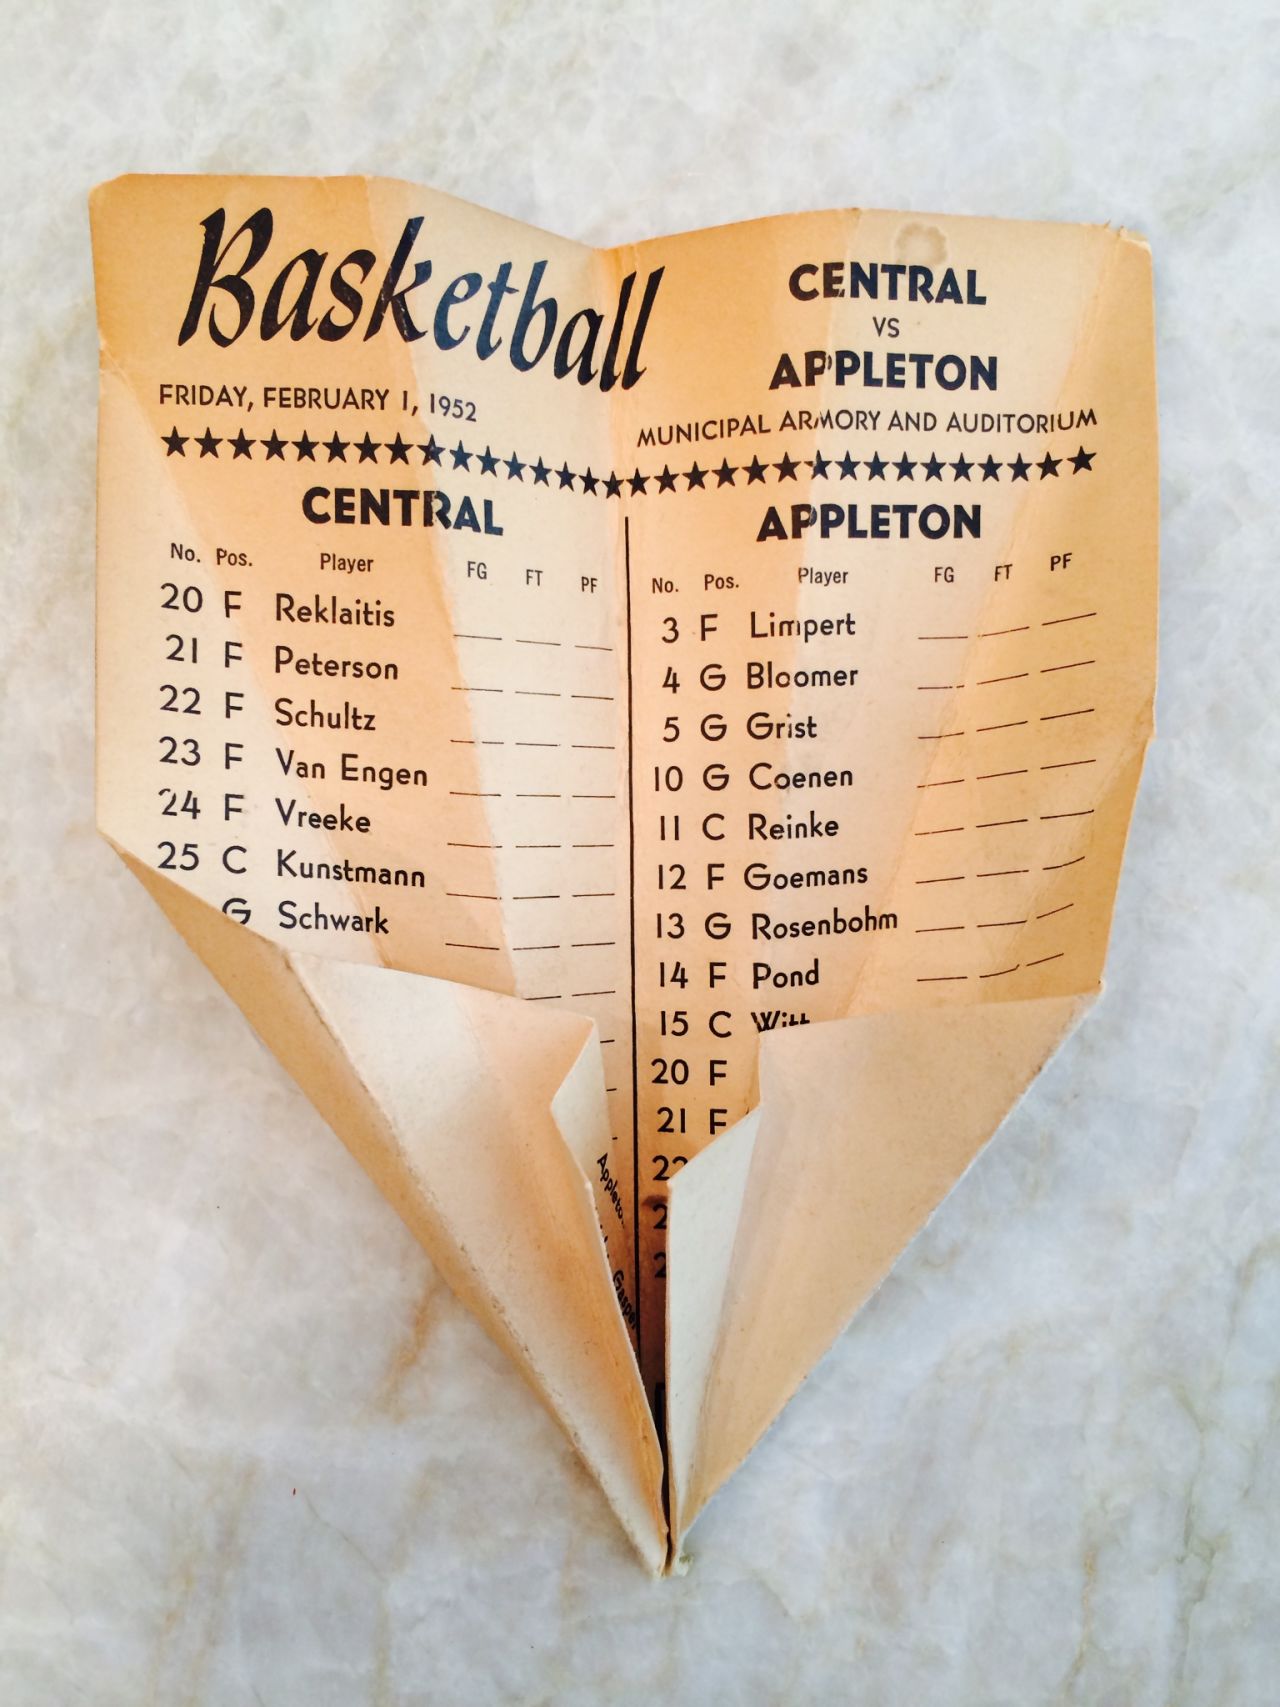 Scraps of old paper from those times can still be found in the Armory today. CNN's Don Riddell discovered this piece of brown card, folded into the shape of a paper airplane, listing the team lineups from a basketball game on February 1, 1952.